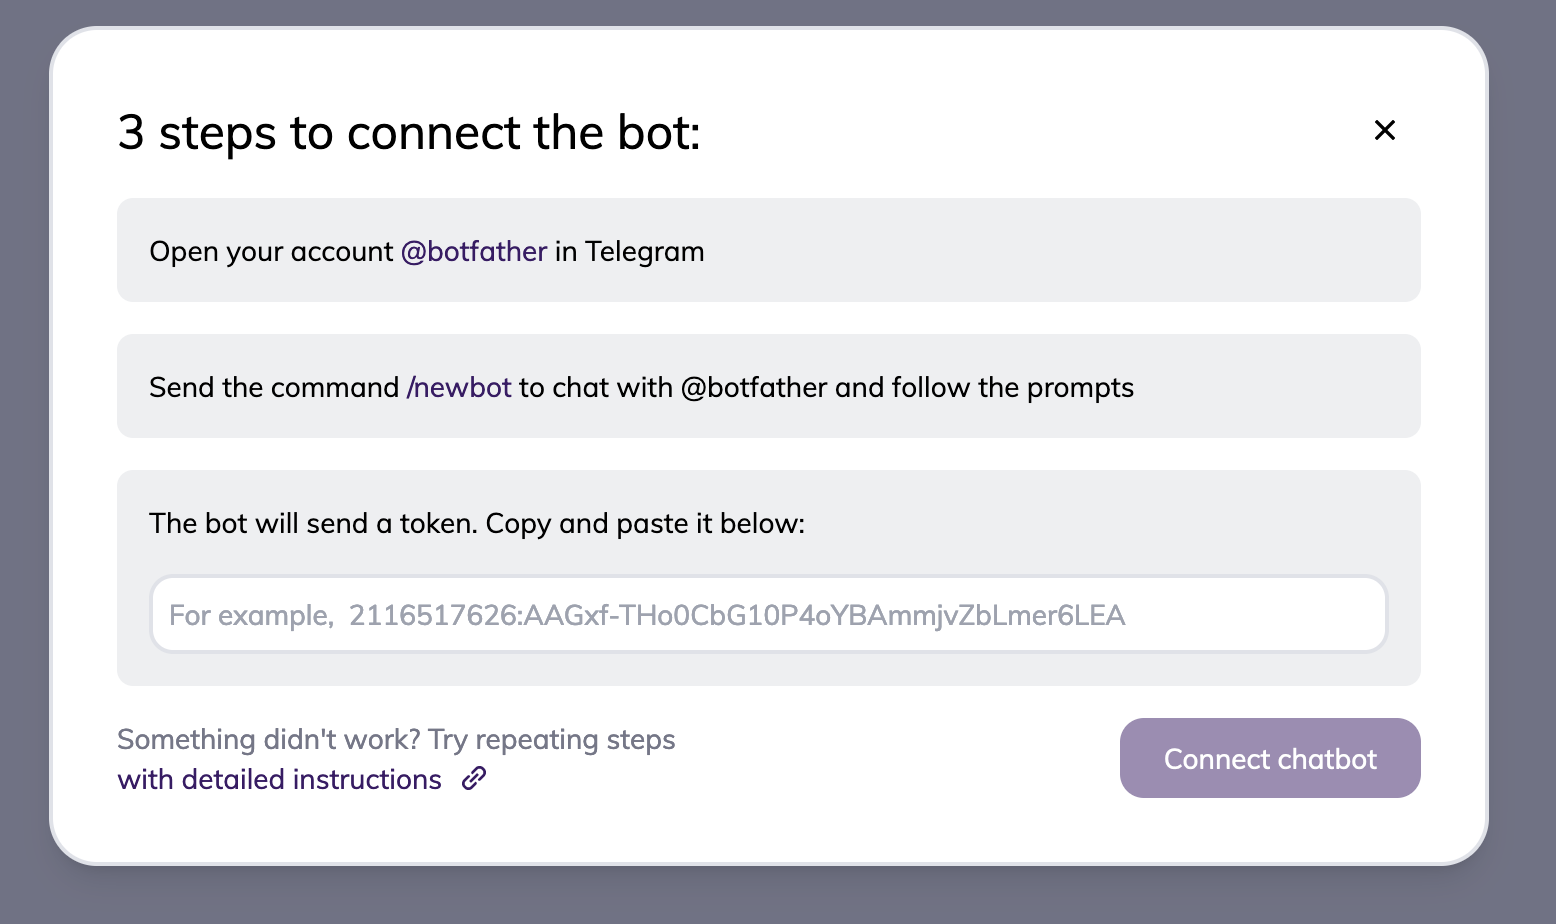 3 steps to connect the bot instructions in the popped-up window